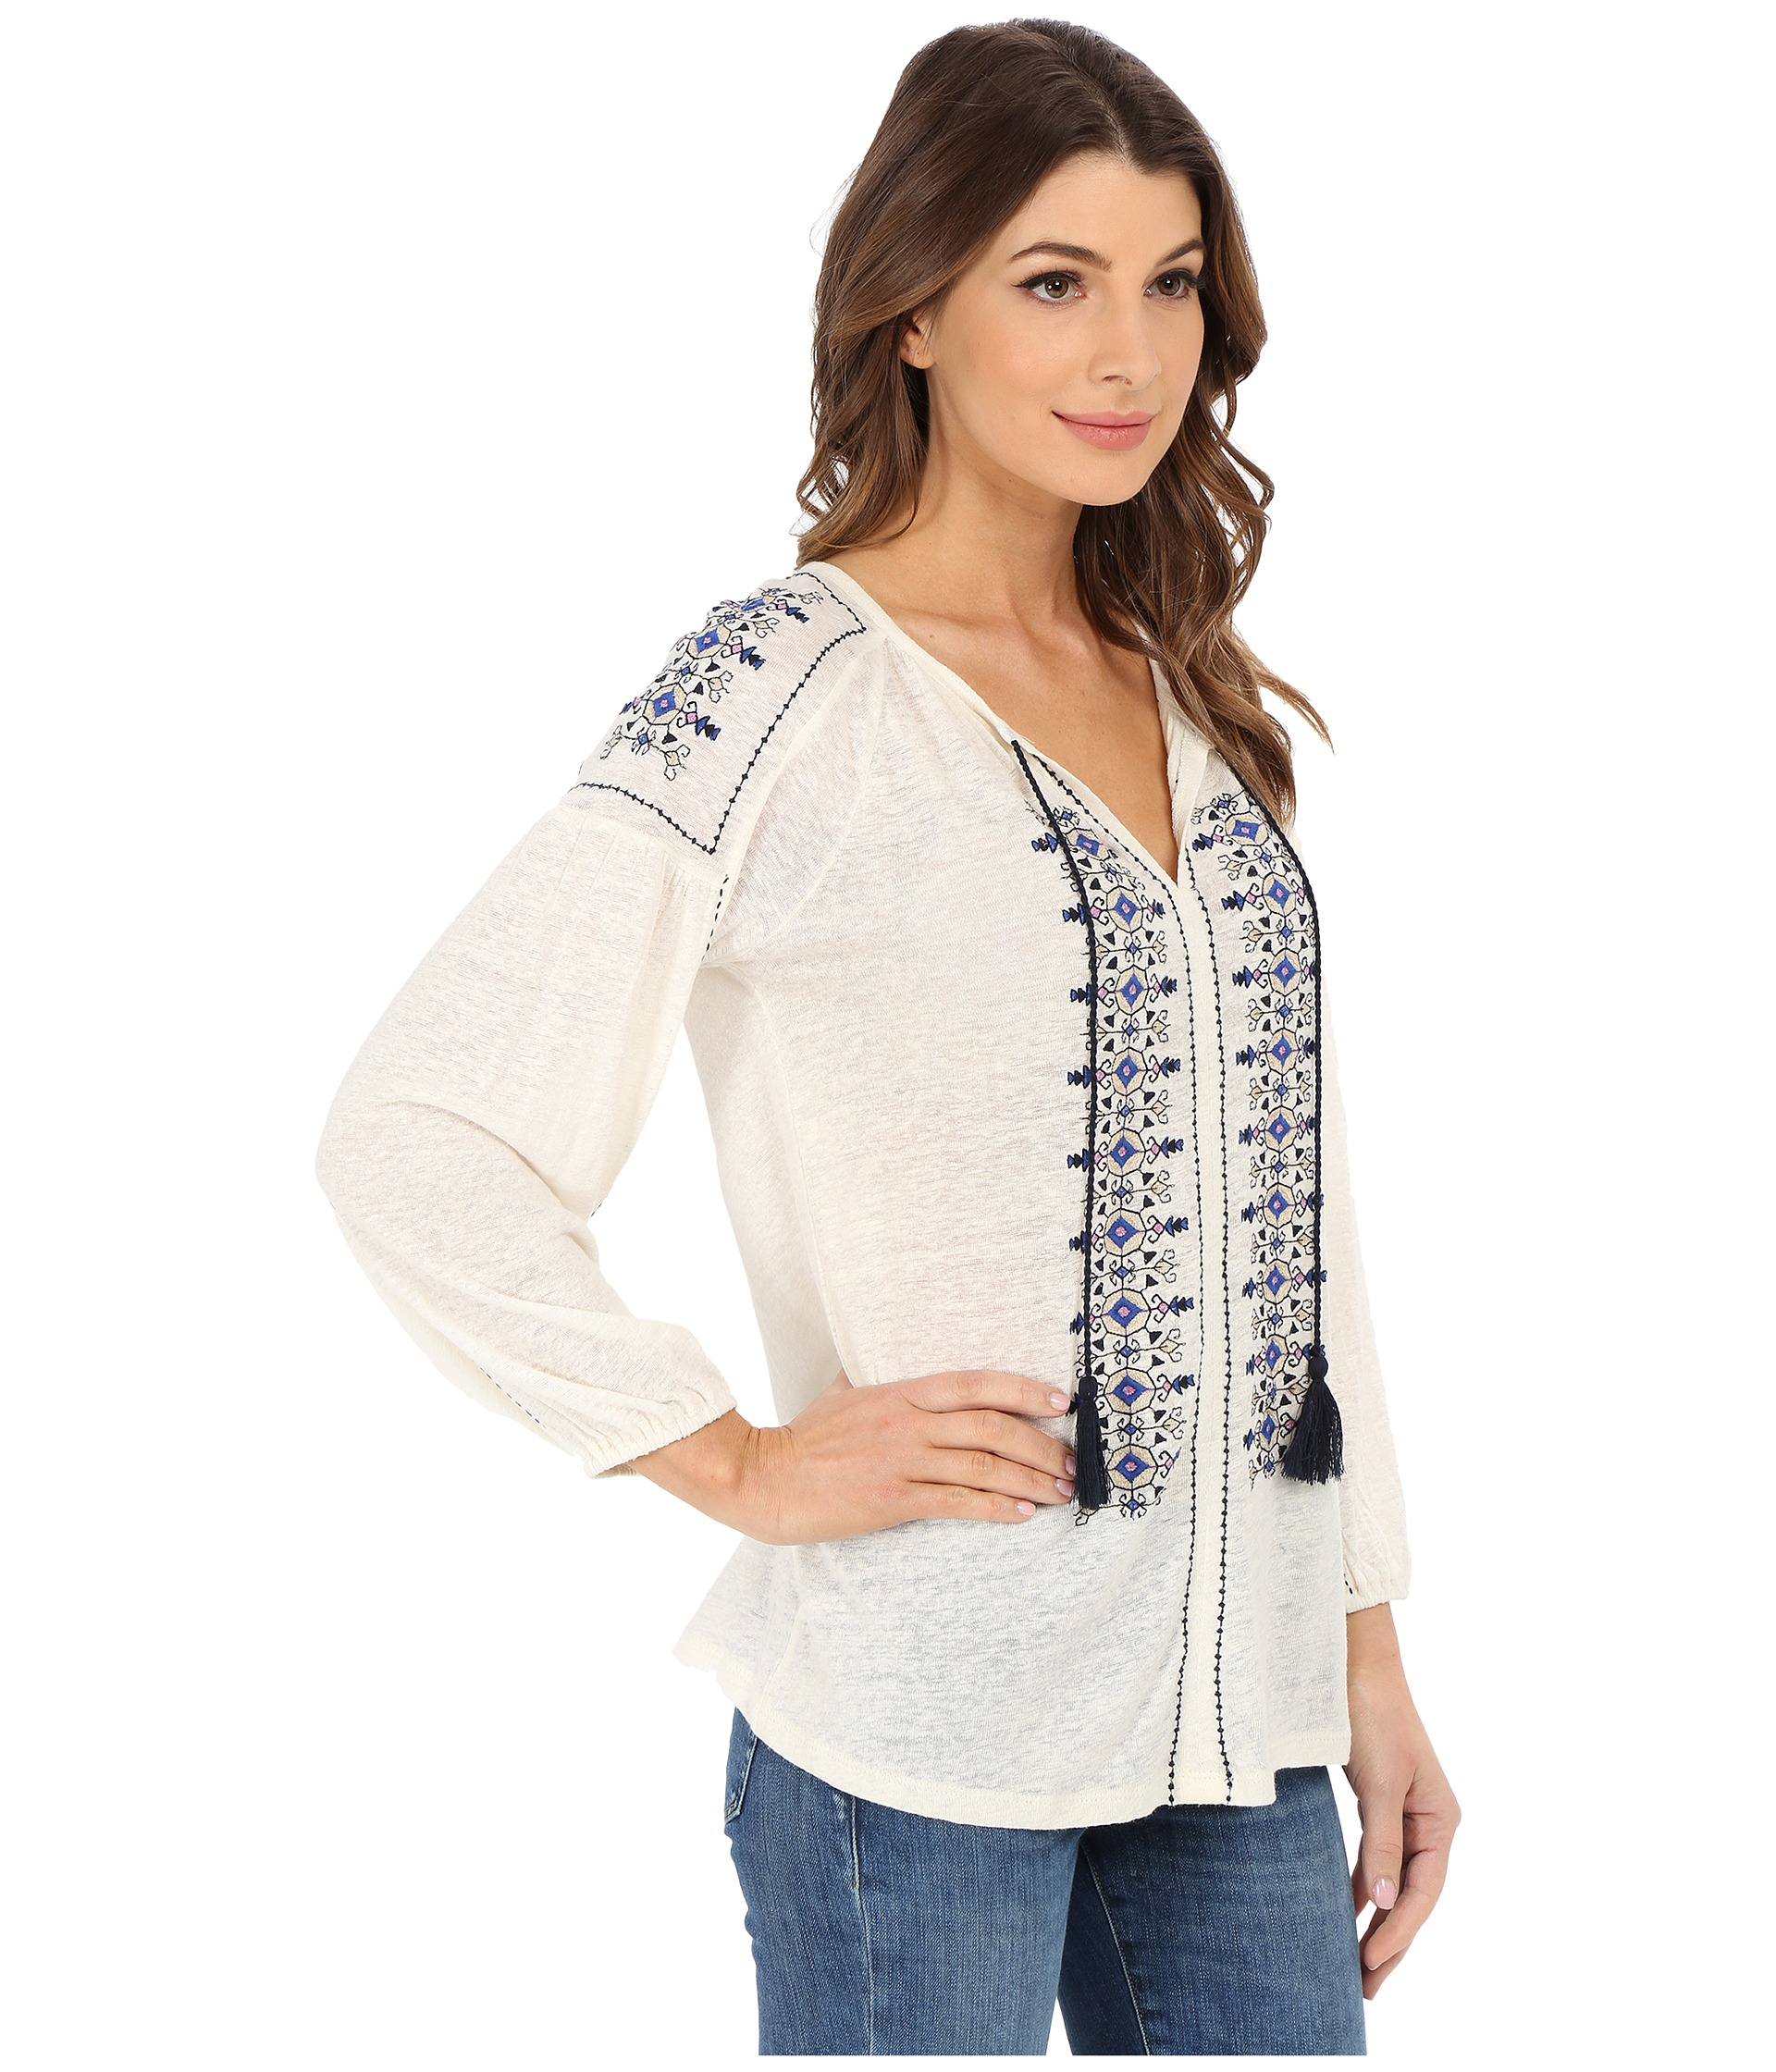 Lyst - Lucky Brand Embroidered Peasant Top in White